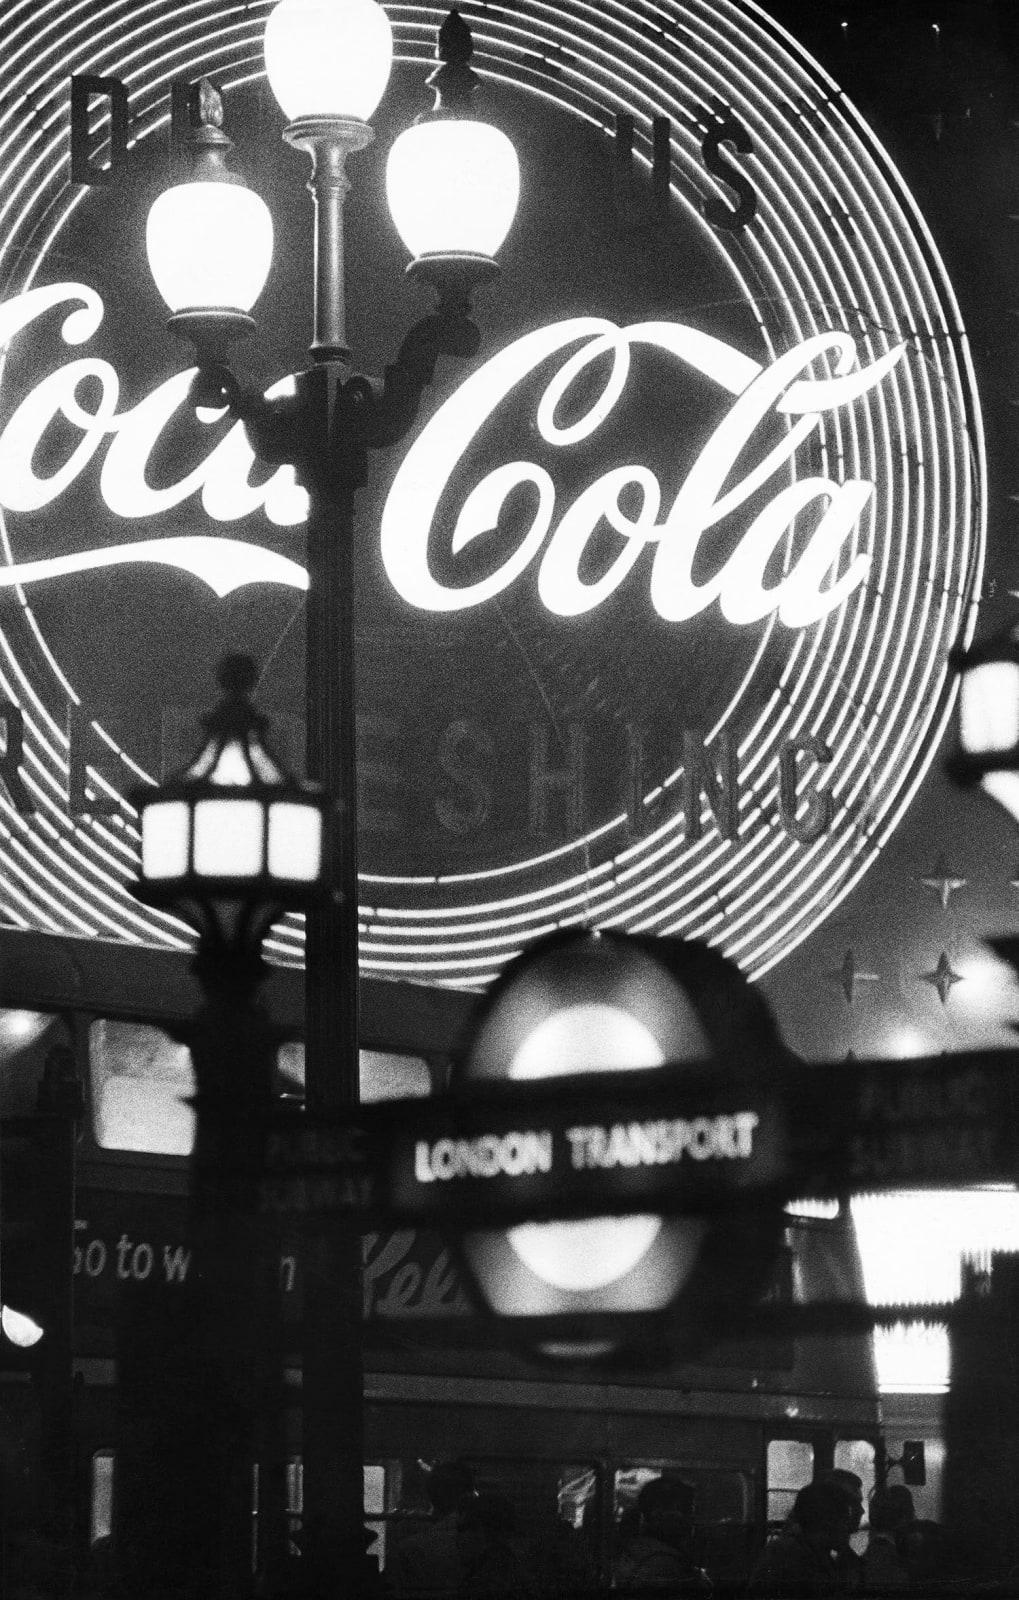 William Klein, Piccadilly, London, 1960s